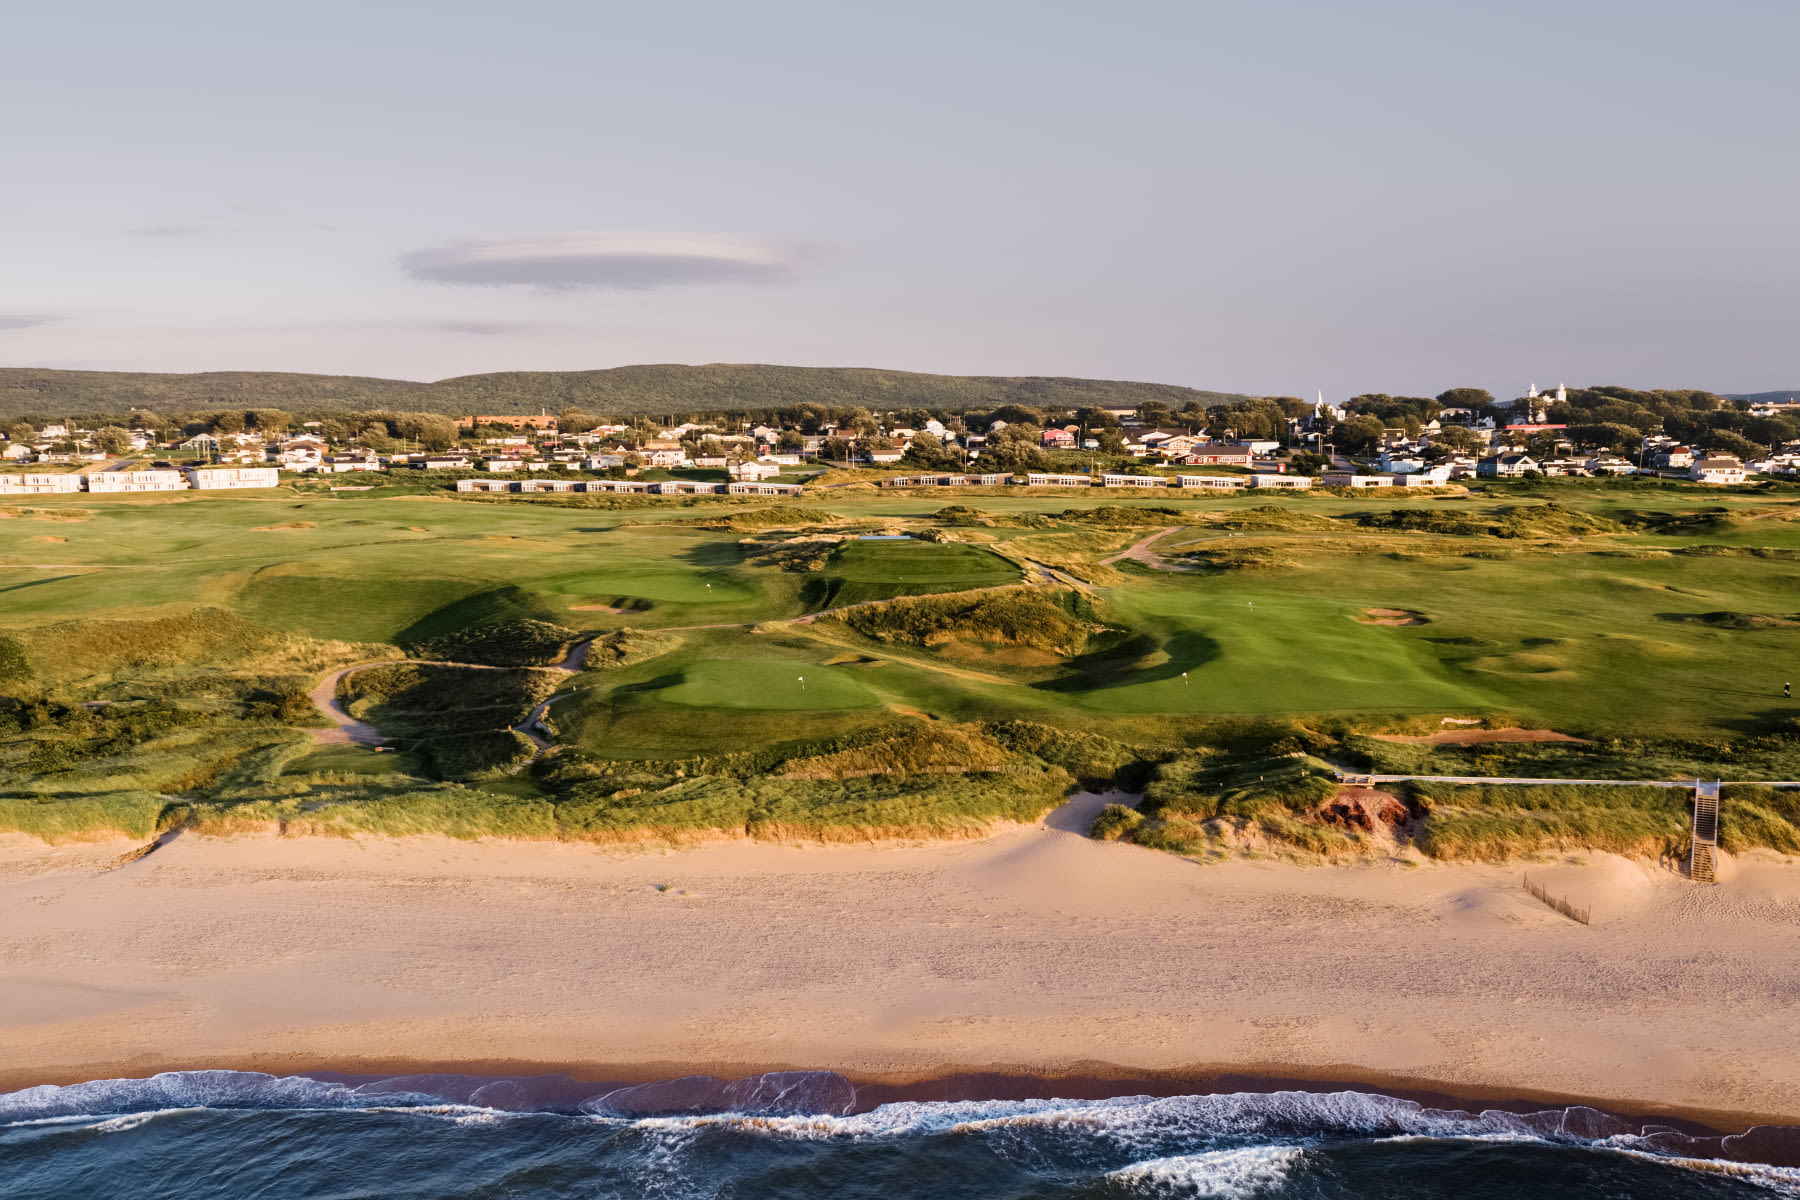 After Wolf Creek, Blackhawk and Sagebrush, Whitman's attention turned to Cabot Links.